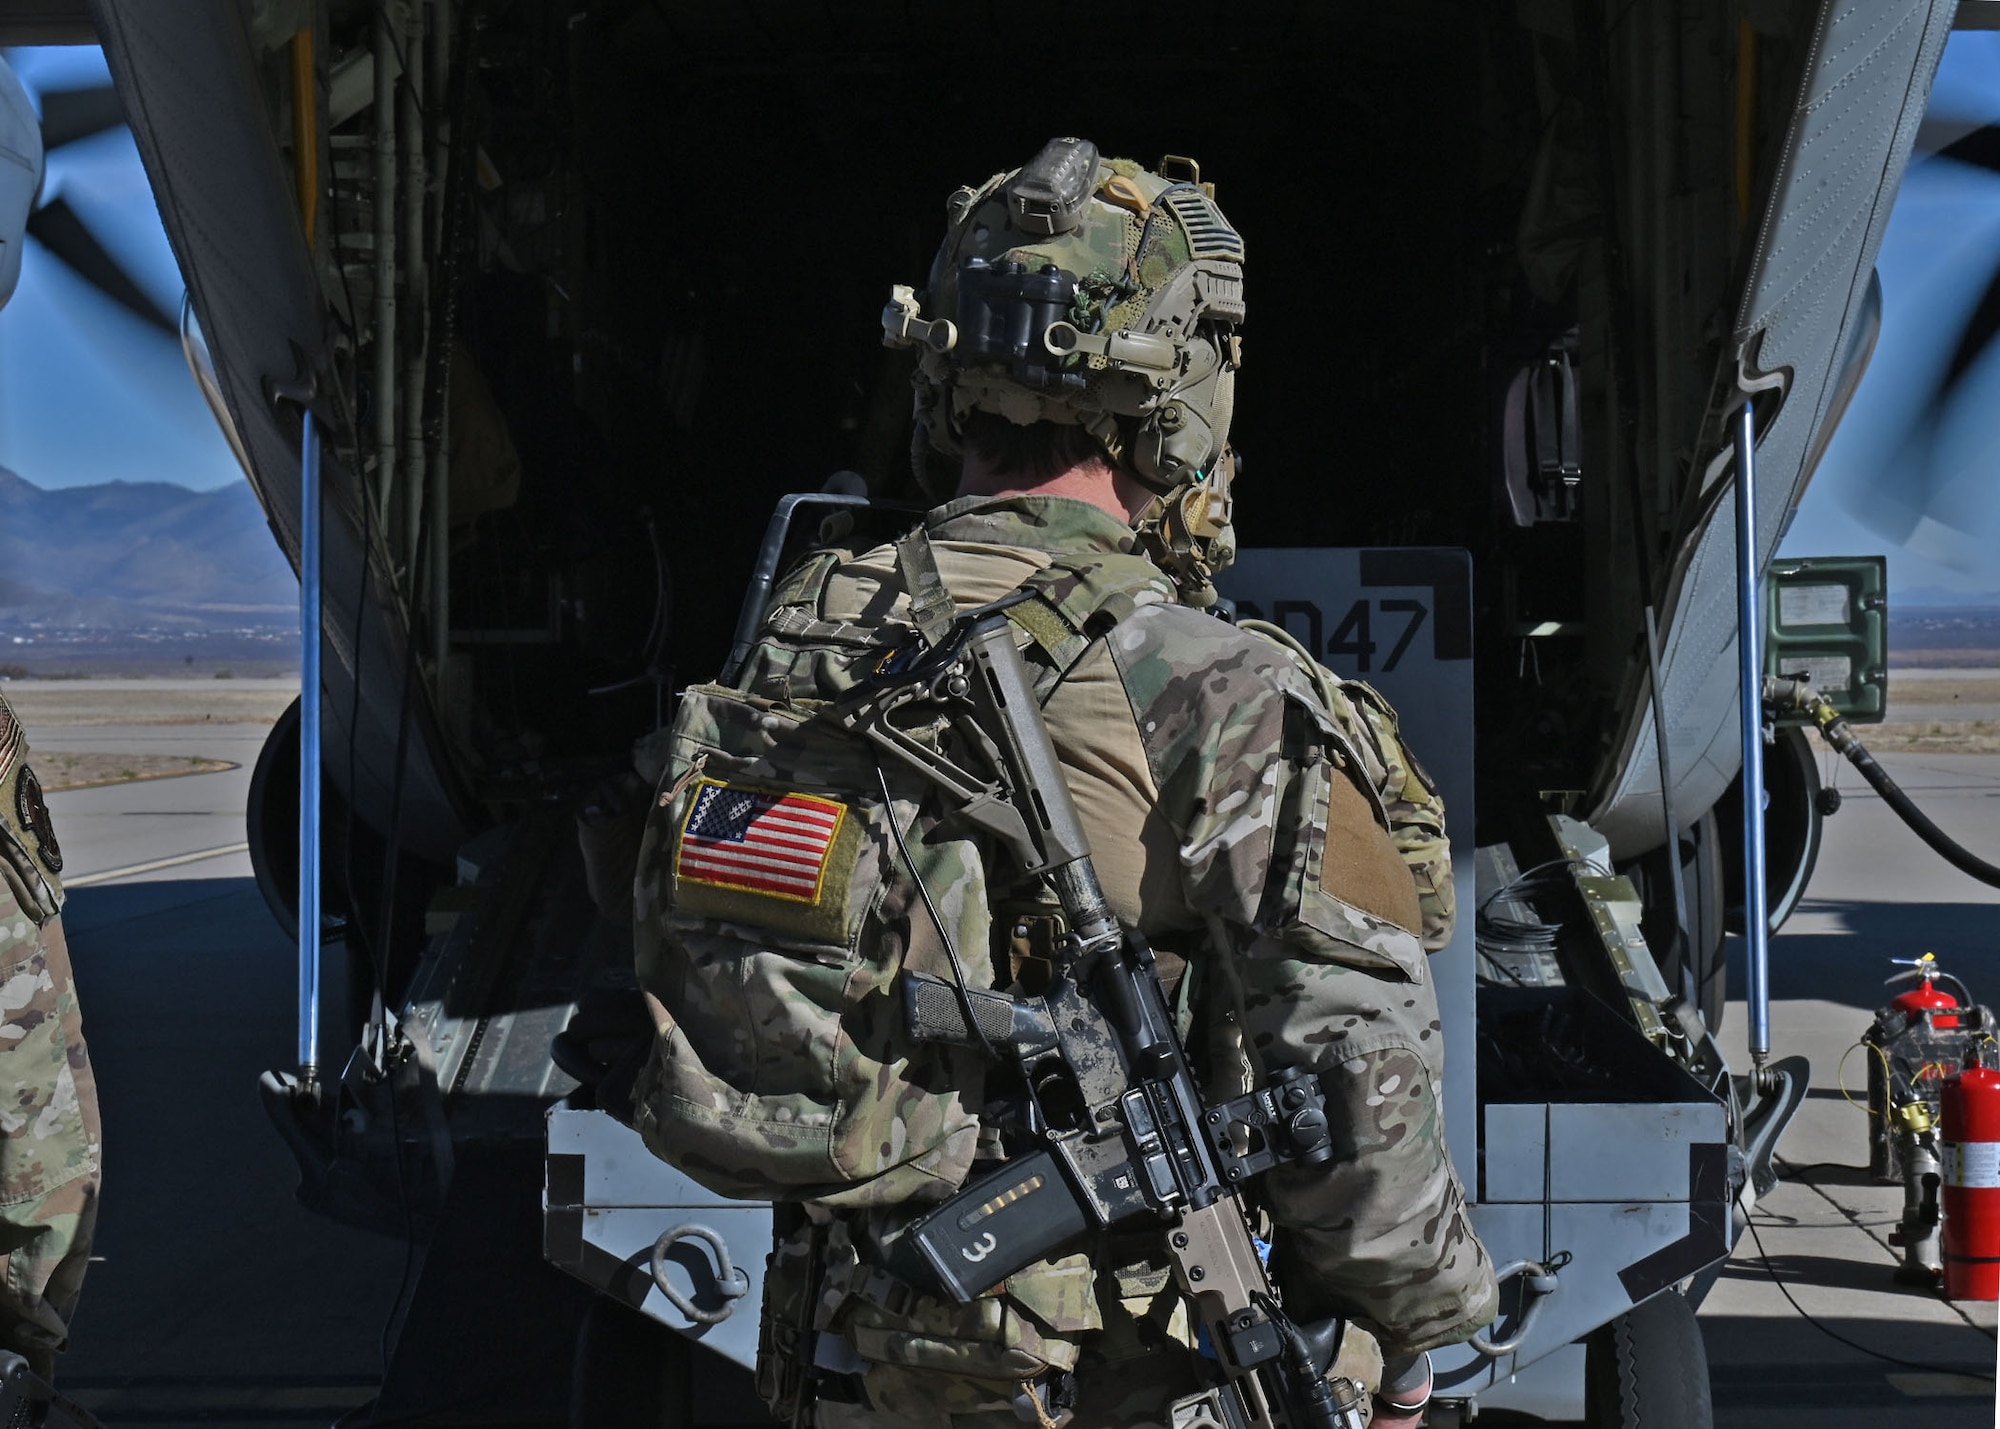 A U.S. Airman assigned to the 48th Rescue Squadron prepares to unload cargo during Exercise Agile Angel at Fort Huachuca, Ariz., Feb. 20, 2024. The 48th RQS demonstrated their comprehensive Airman fitness when they rapidly dispersed, defended the mock contingency location and demonstrated how they generated combat power. (U.S. Air Force photo by Staff Sgt. Abbey Rieves)